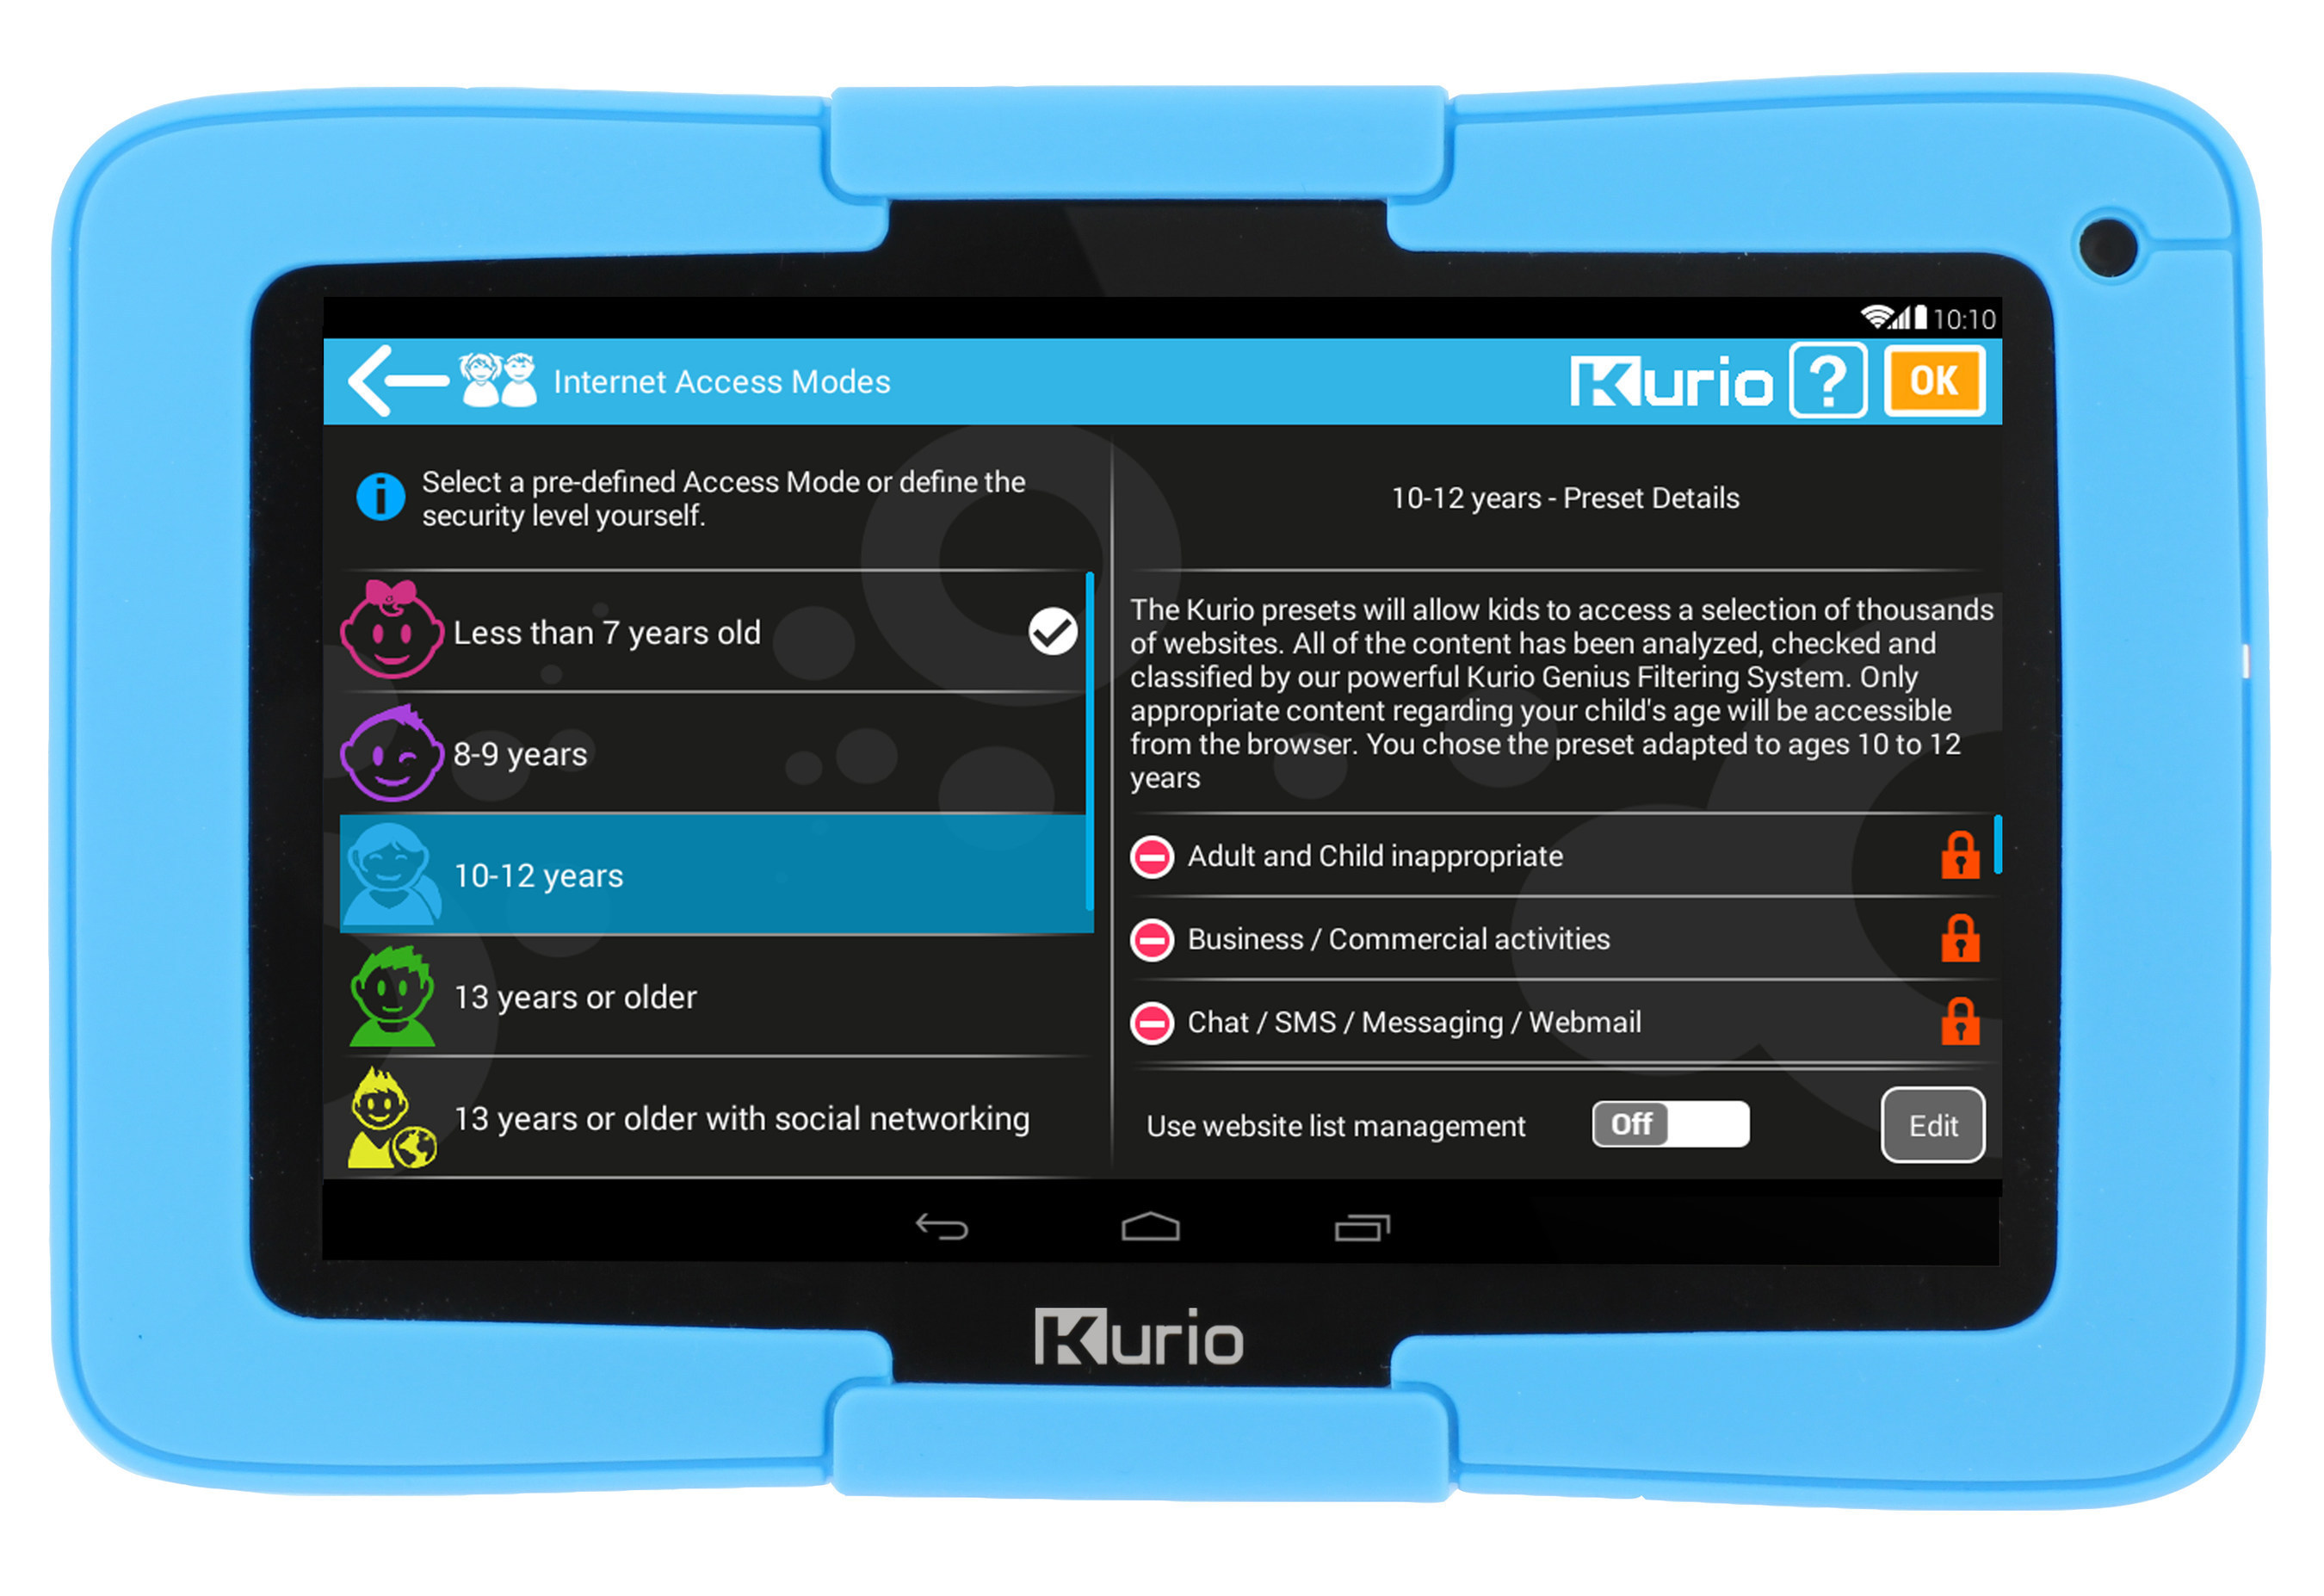 Kurio Xtreme includes the proprietary Kurio Genius Internet filtering system that is updated daily, covering more than 500 million websites in 170 languages to block inappropriate content and keep kids safe online.  No subscription is required.  Parents can choose from pre-defined Access Modes by age category, safe list or block specific websites or define a custom filter that meets their comfort level. (PRNewsFoto/Techno Source)